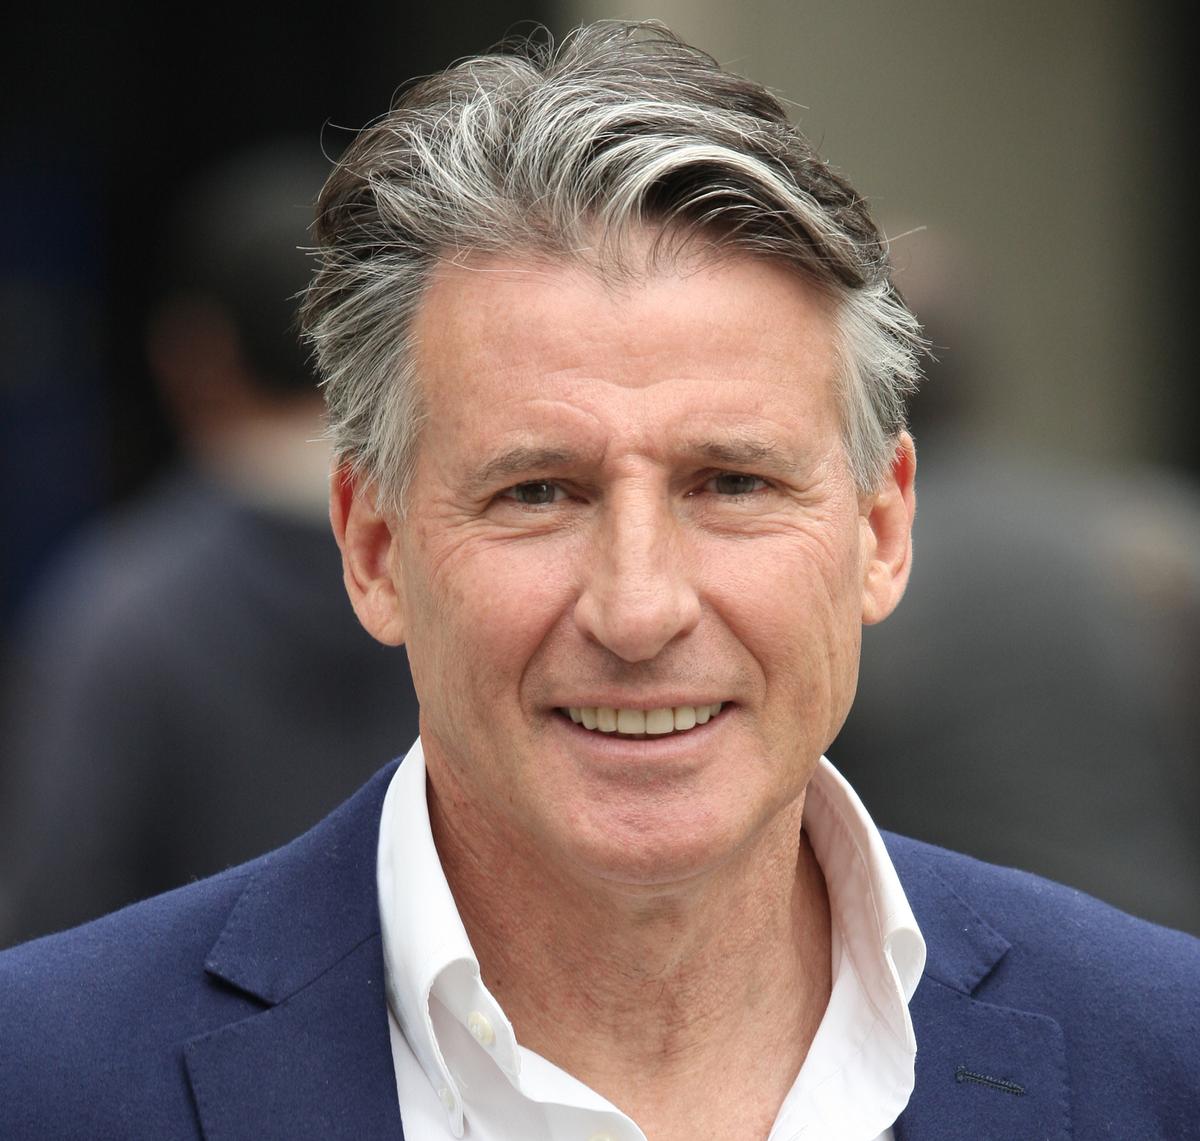 Coe, who has held the role since 2015, is expected to be named president for a further four-year term